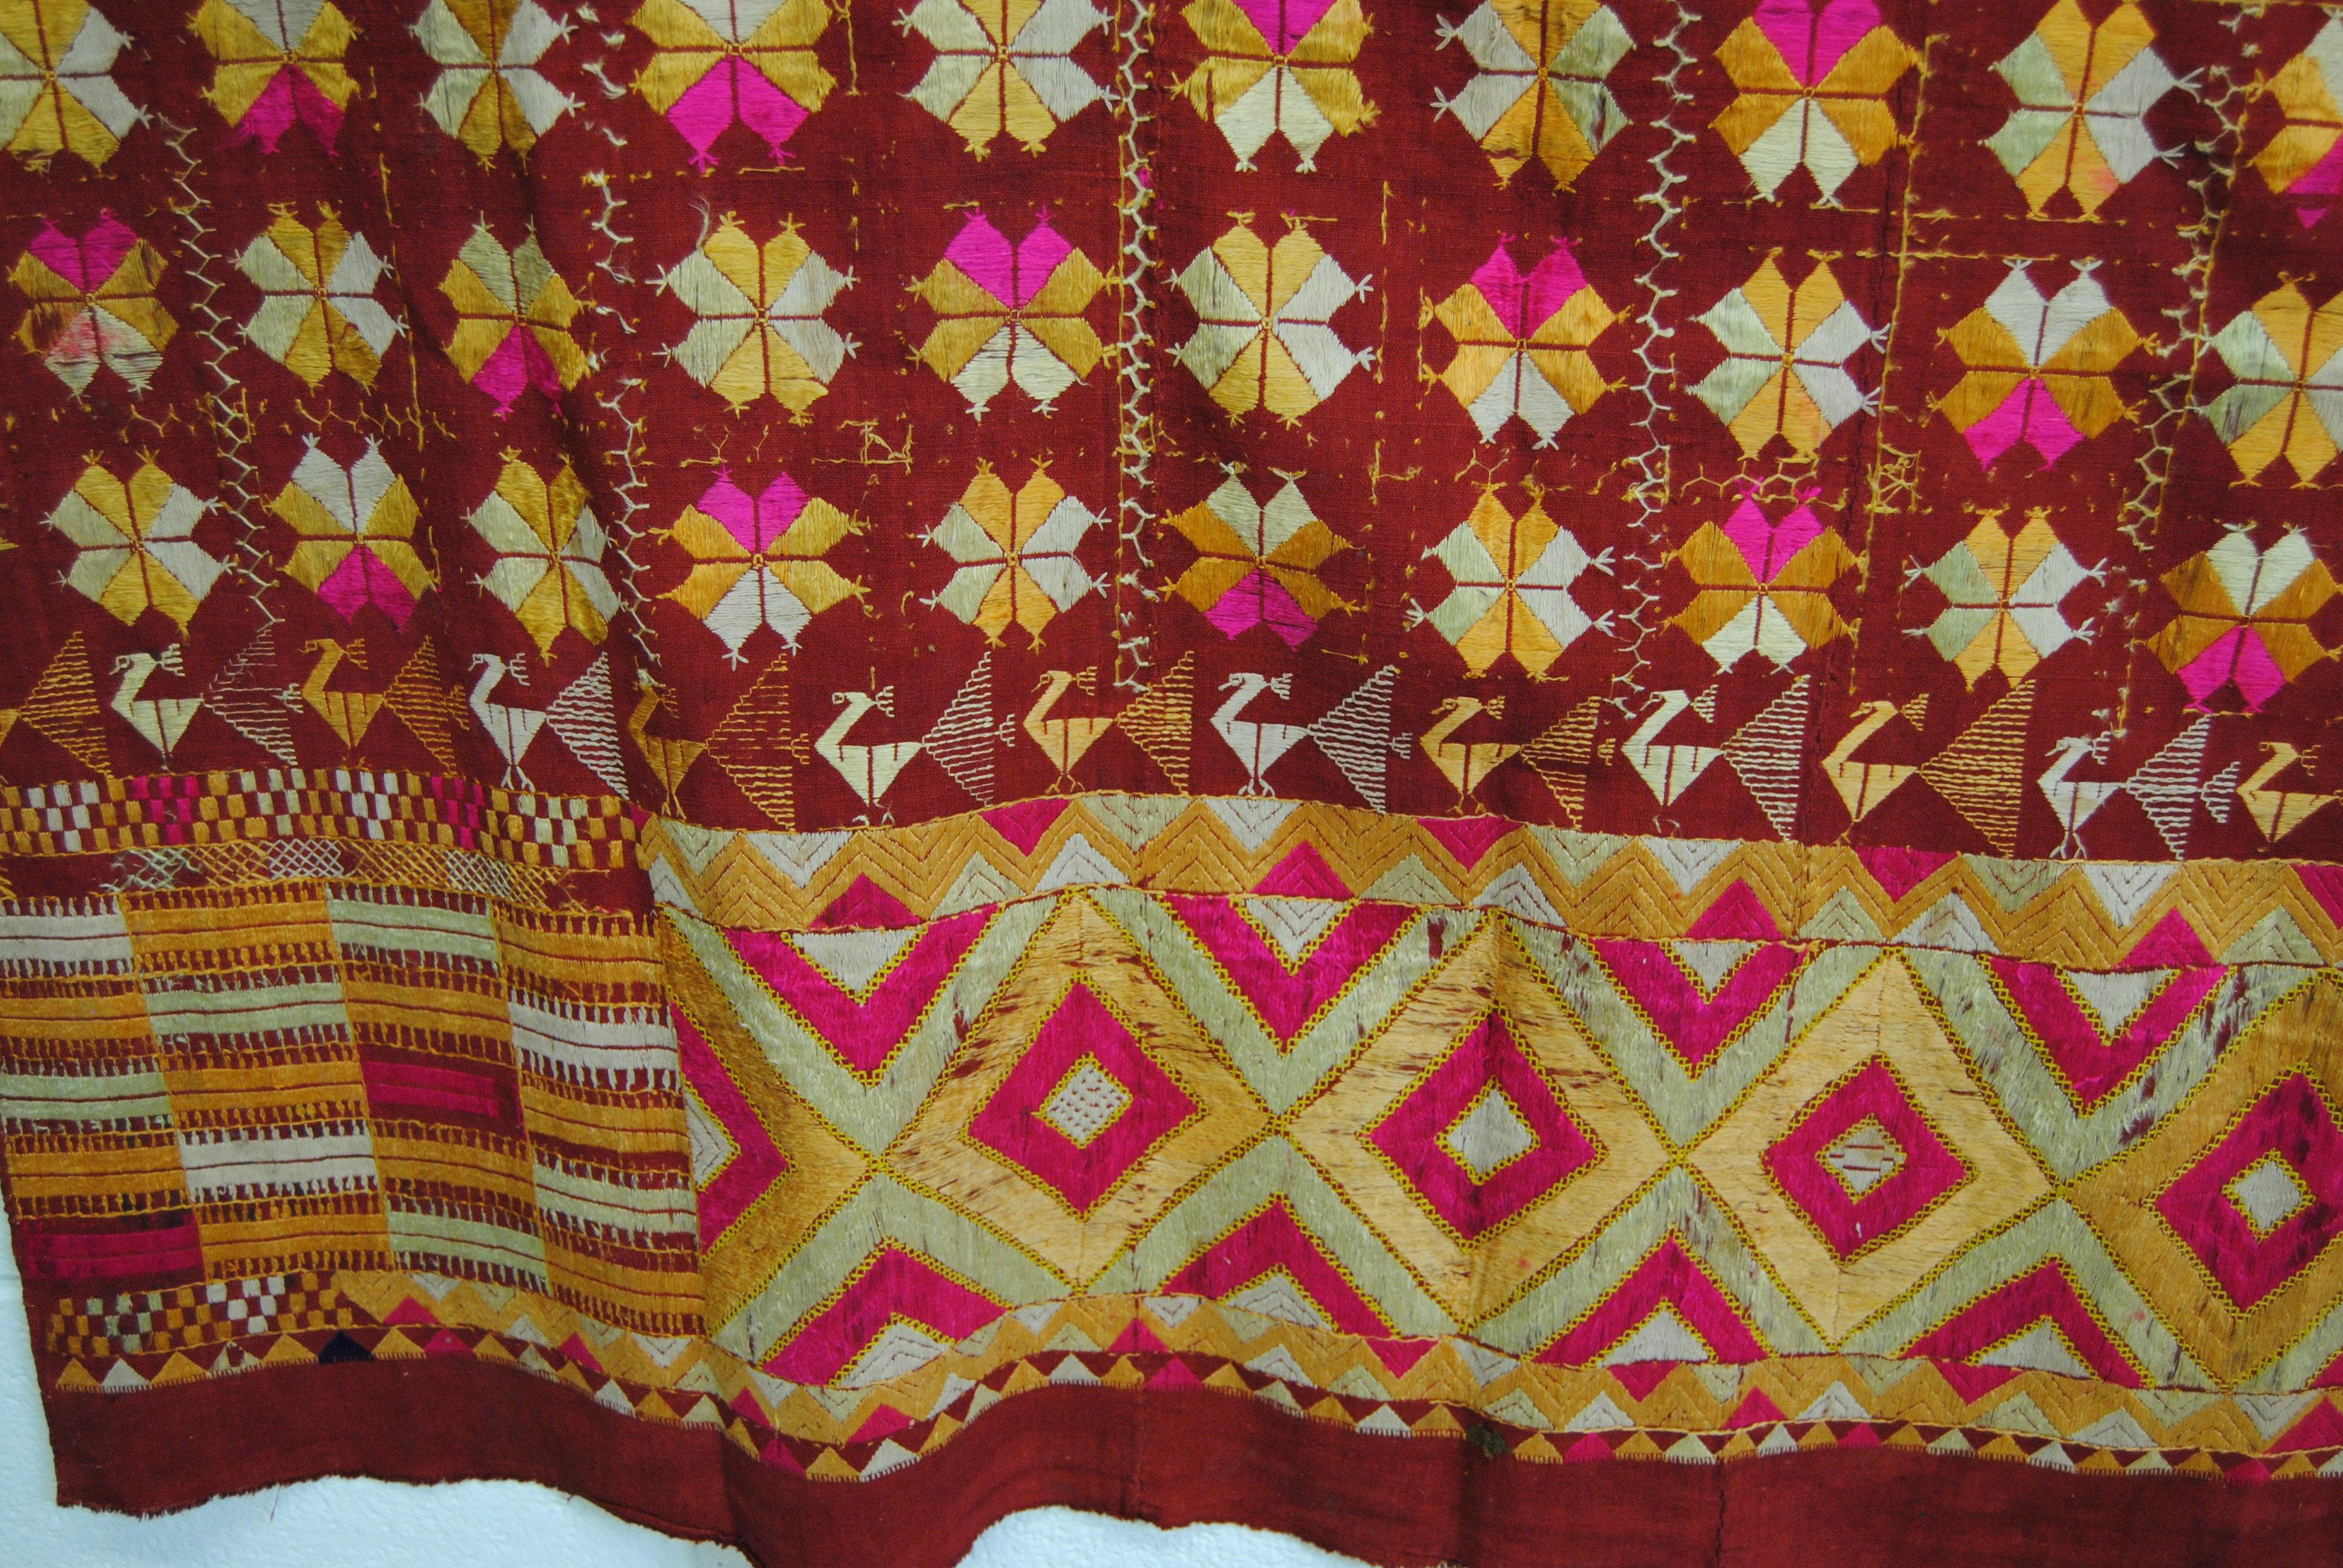 Vintage silk embroidered wedding shawl from Punjab, India. The base cloth is handwoven cotton khadi cloth that is hand embroidered with vibrant silk threads. It was traditionally made by members of the young bride's family for her wedding and other